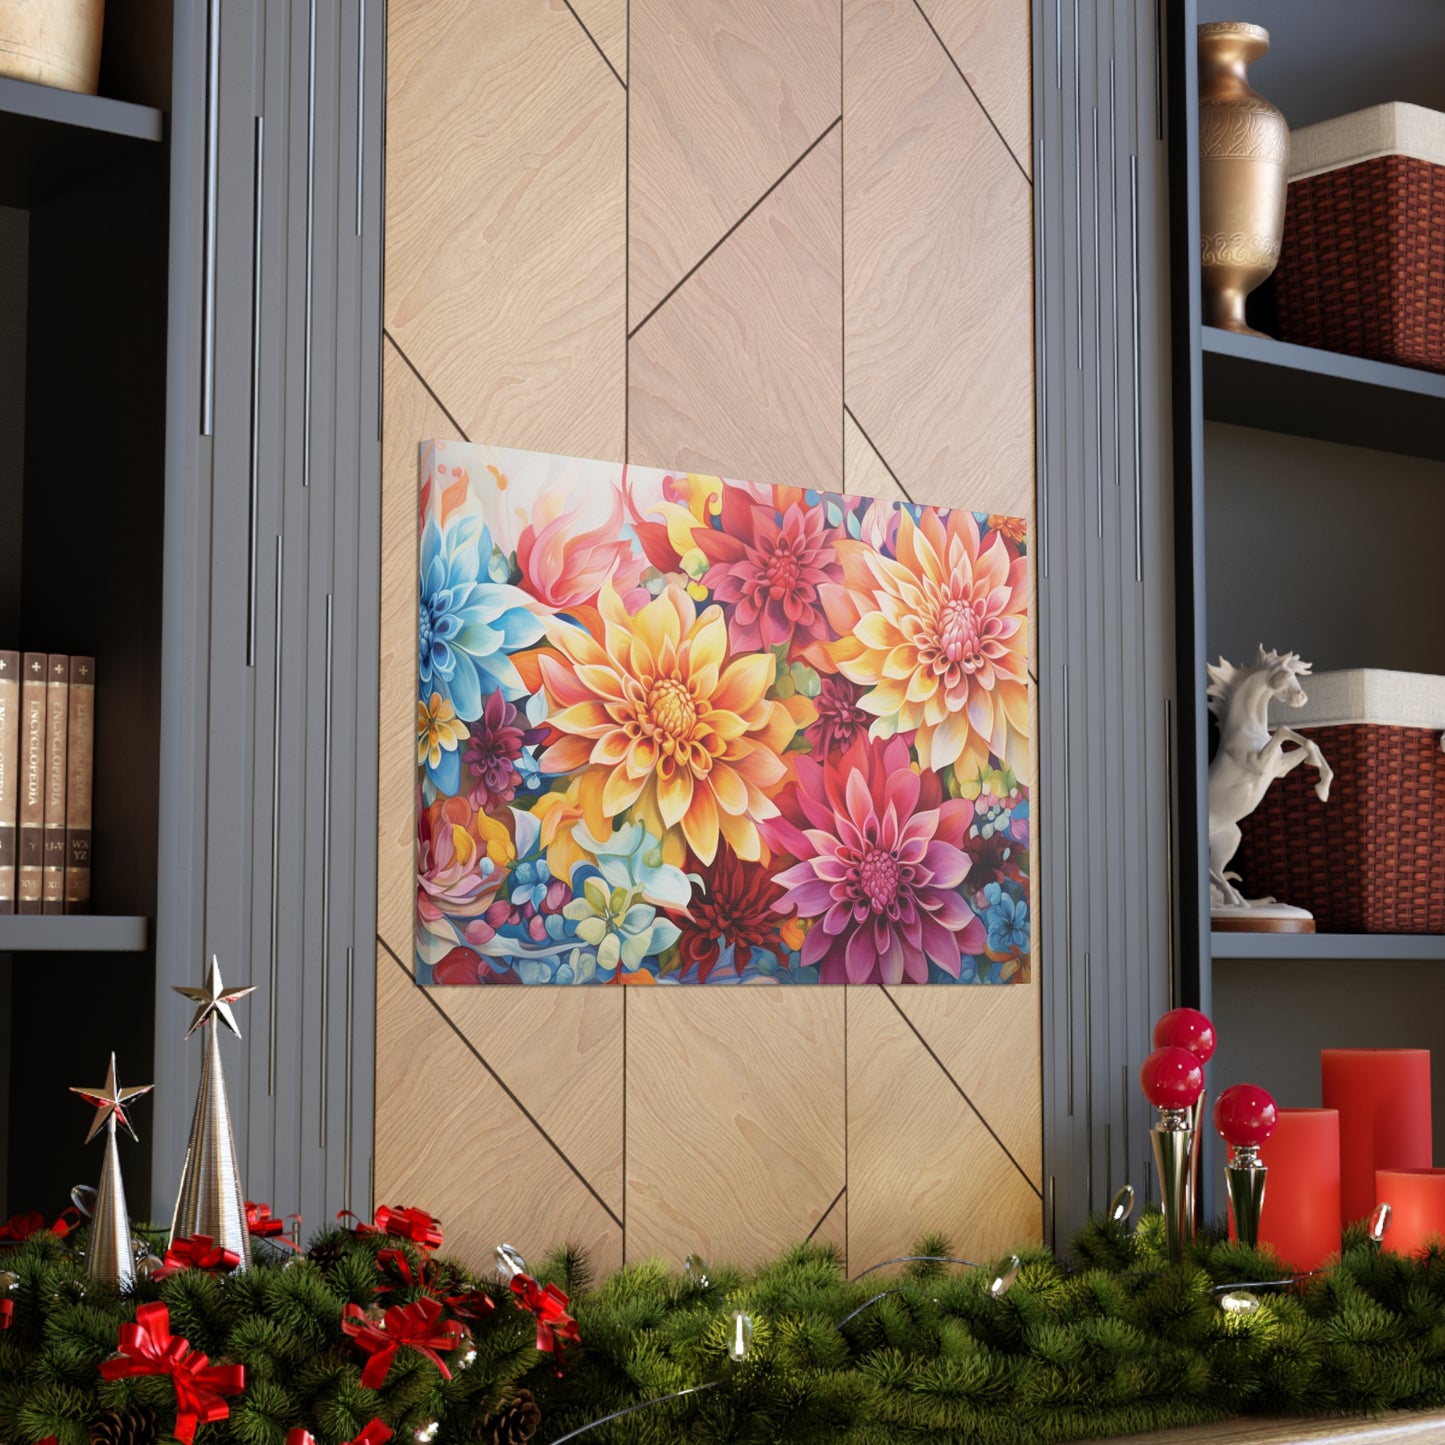 Floral Abstract Gallery Wrap